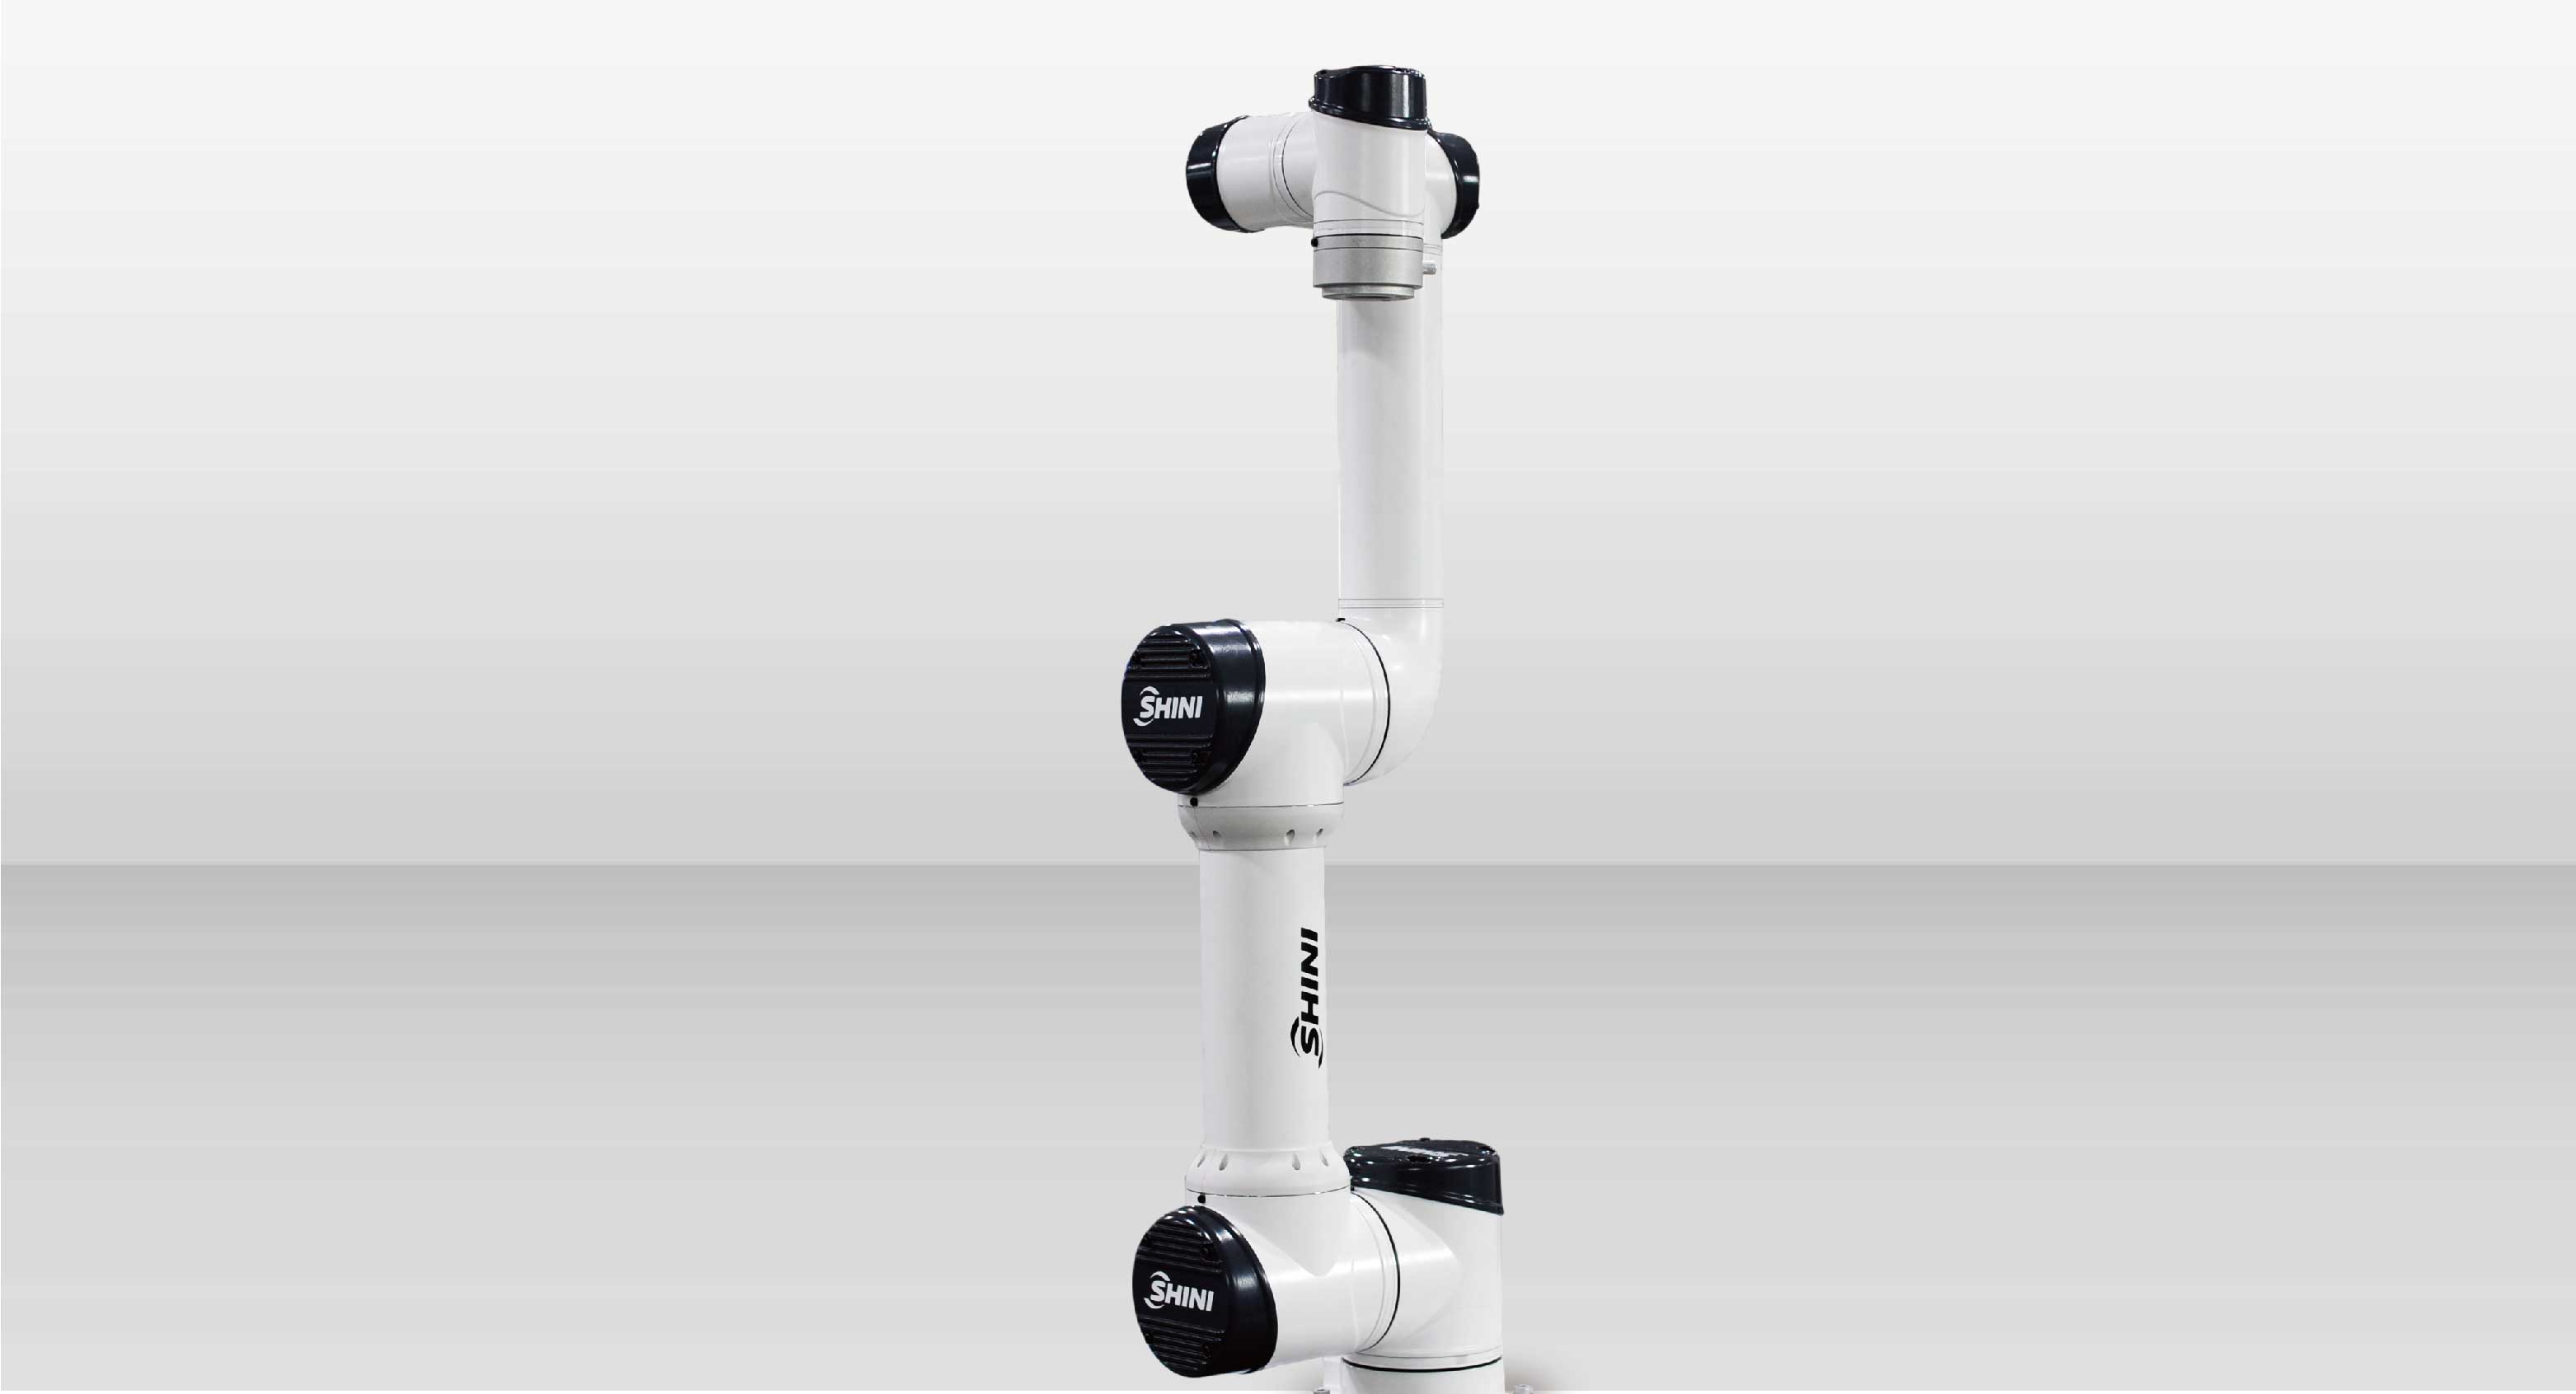 Collaborated robot S Cobot-i5